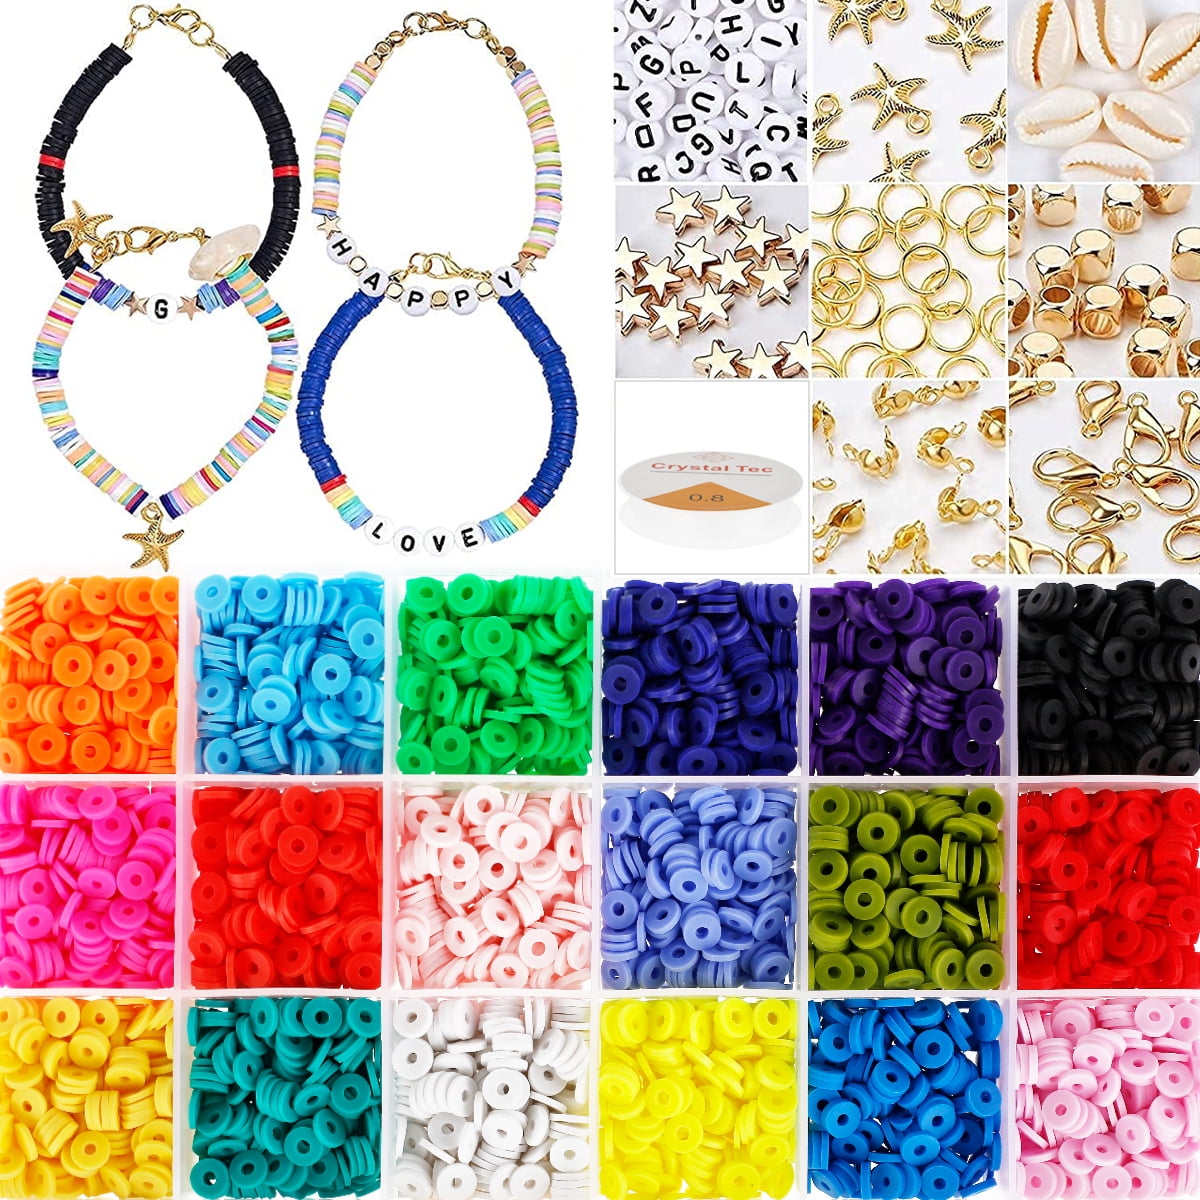 DSstyles 200 Silicone Beads for Jewelry Making Kit with 5m Rope, DIY Arts  and Crafts Set, Gift for Girls